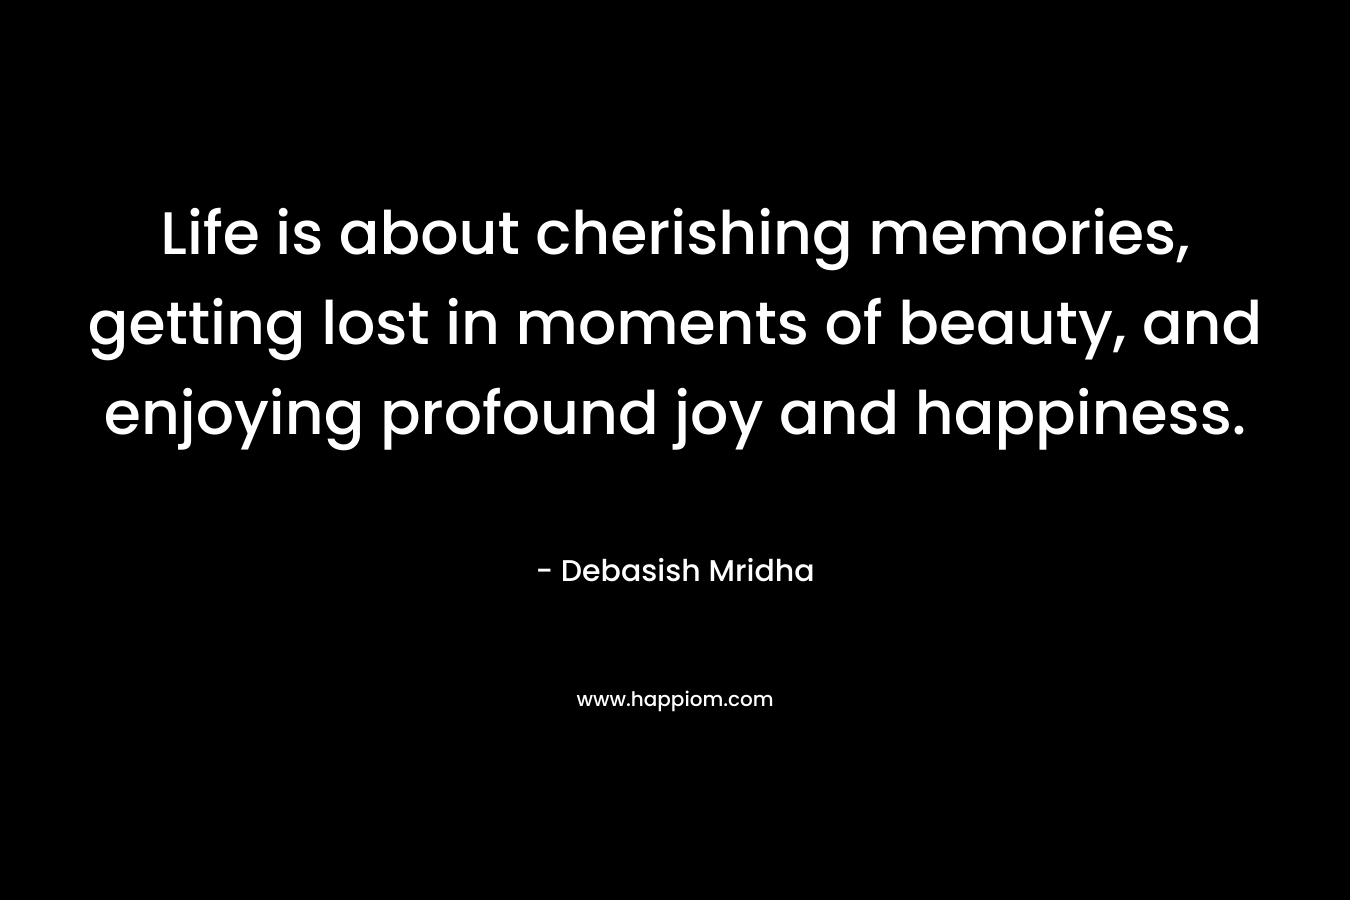 Life is about cherishing memories, getting lost in moments of beauty, and enjoying profound joy and happiness.